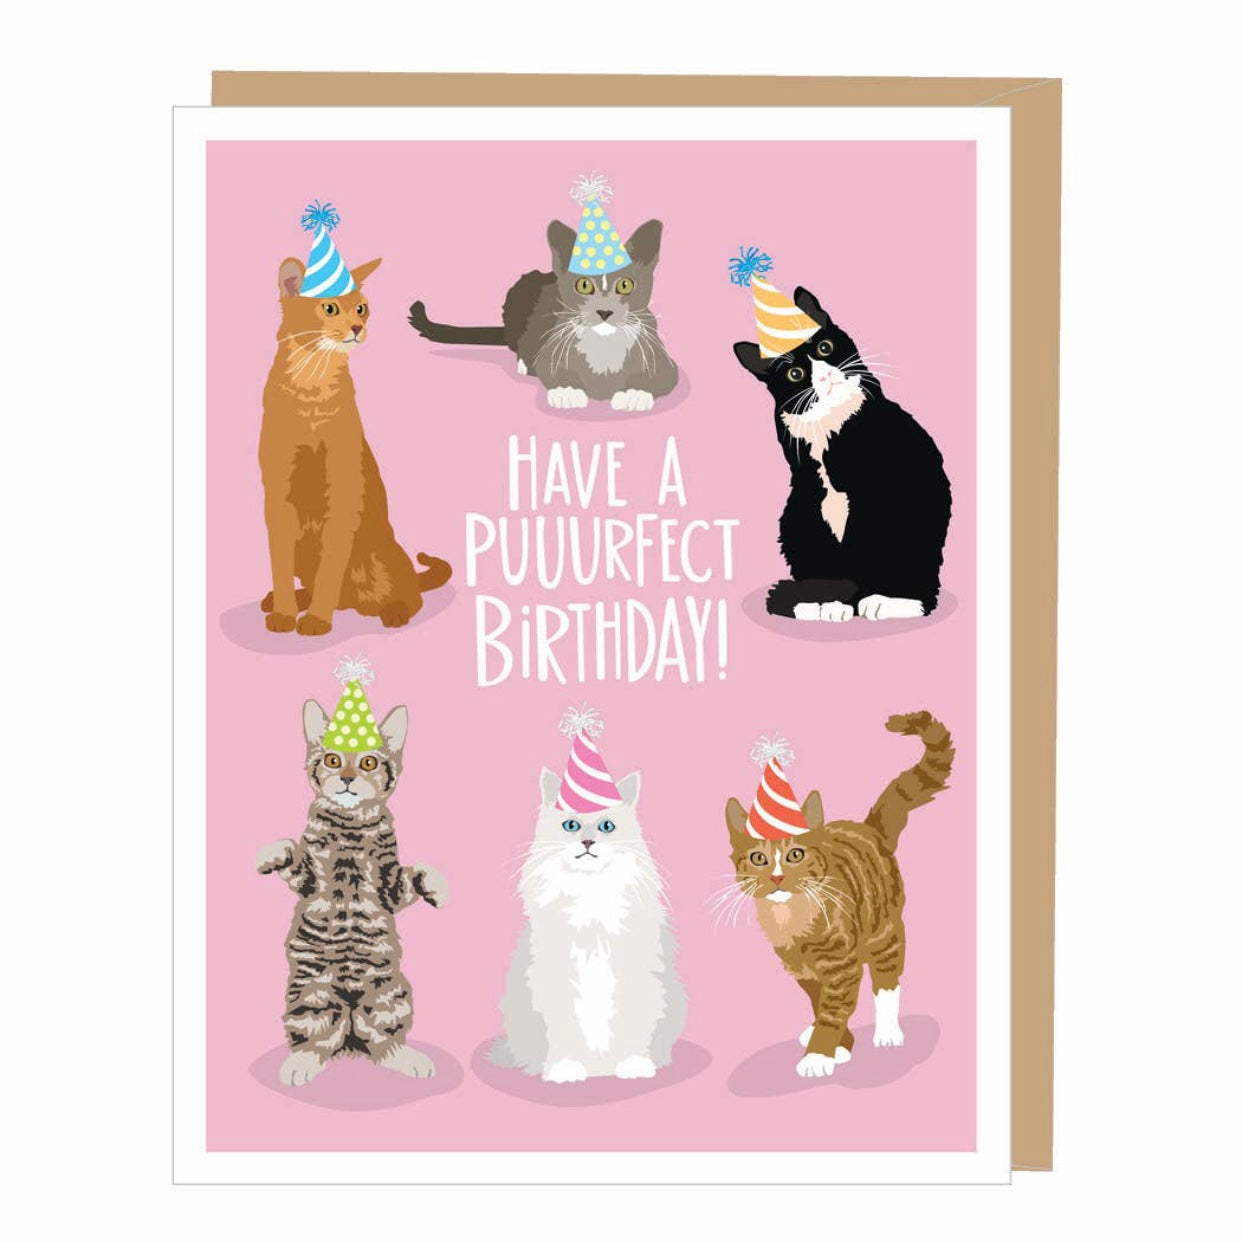 Have a puuurfect birthday greeting card